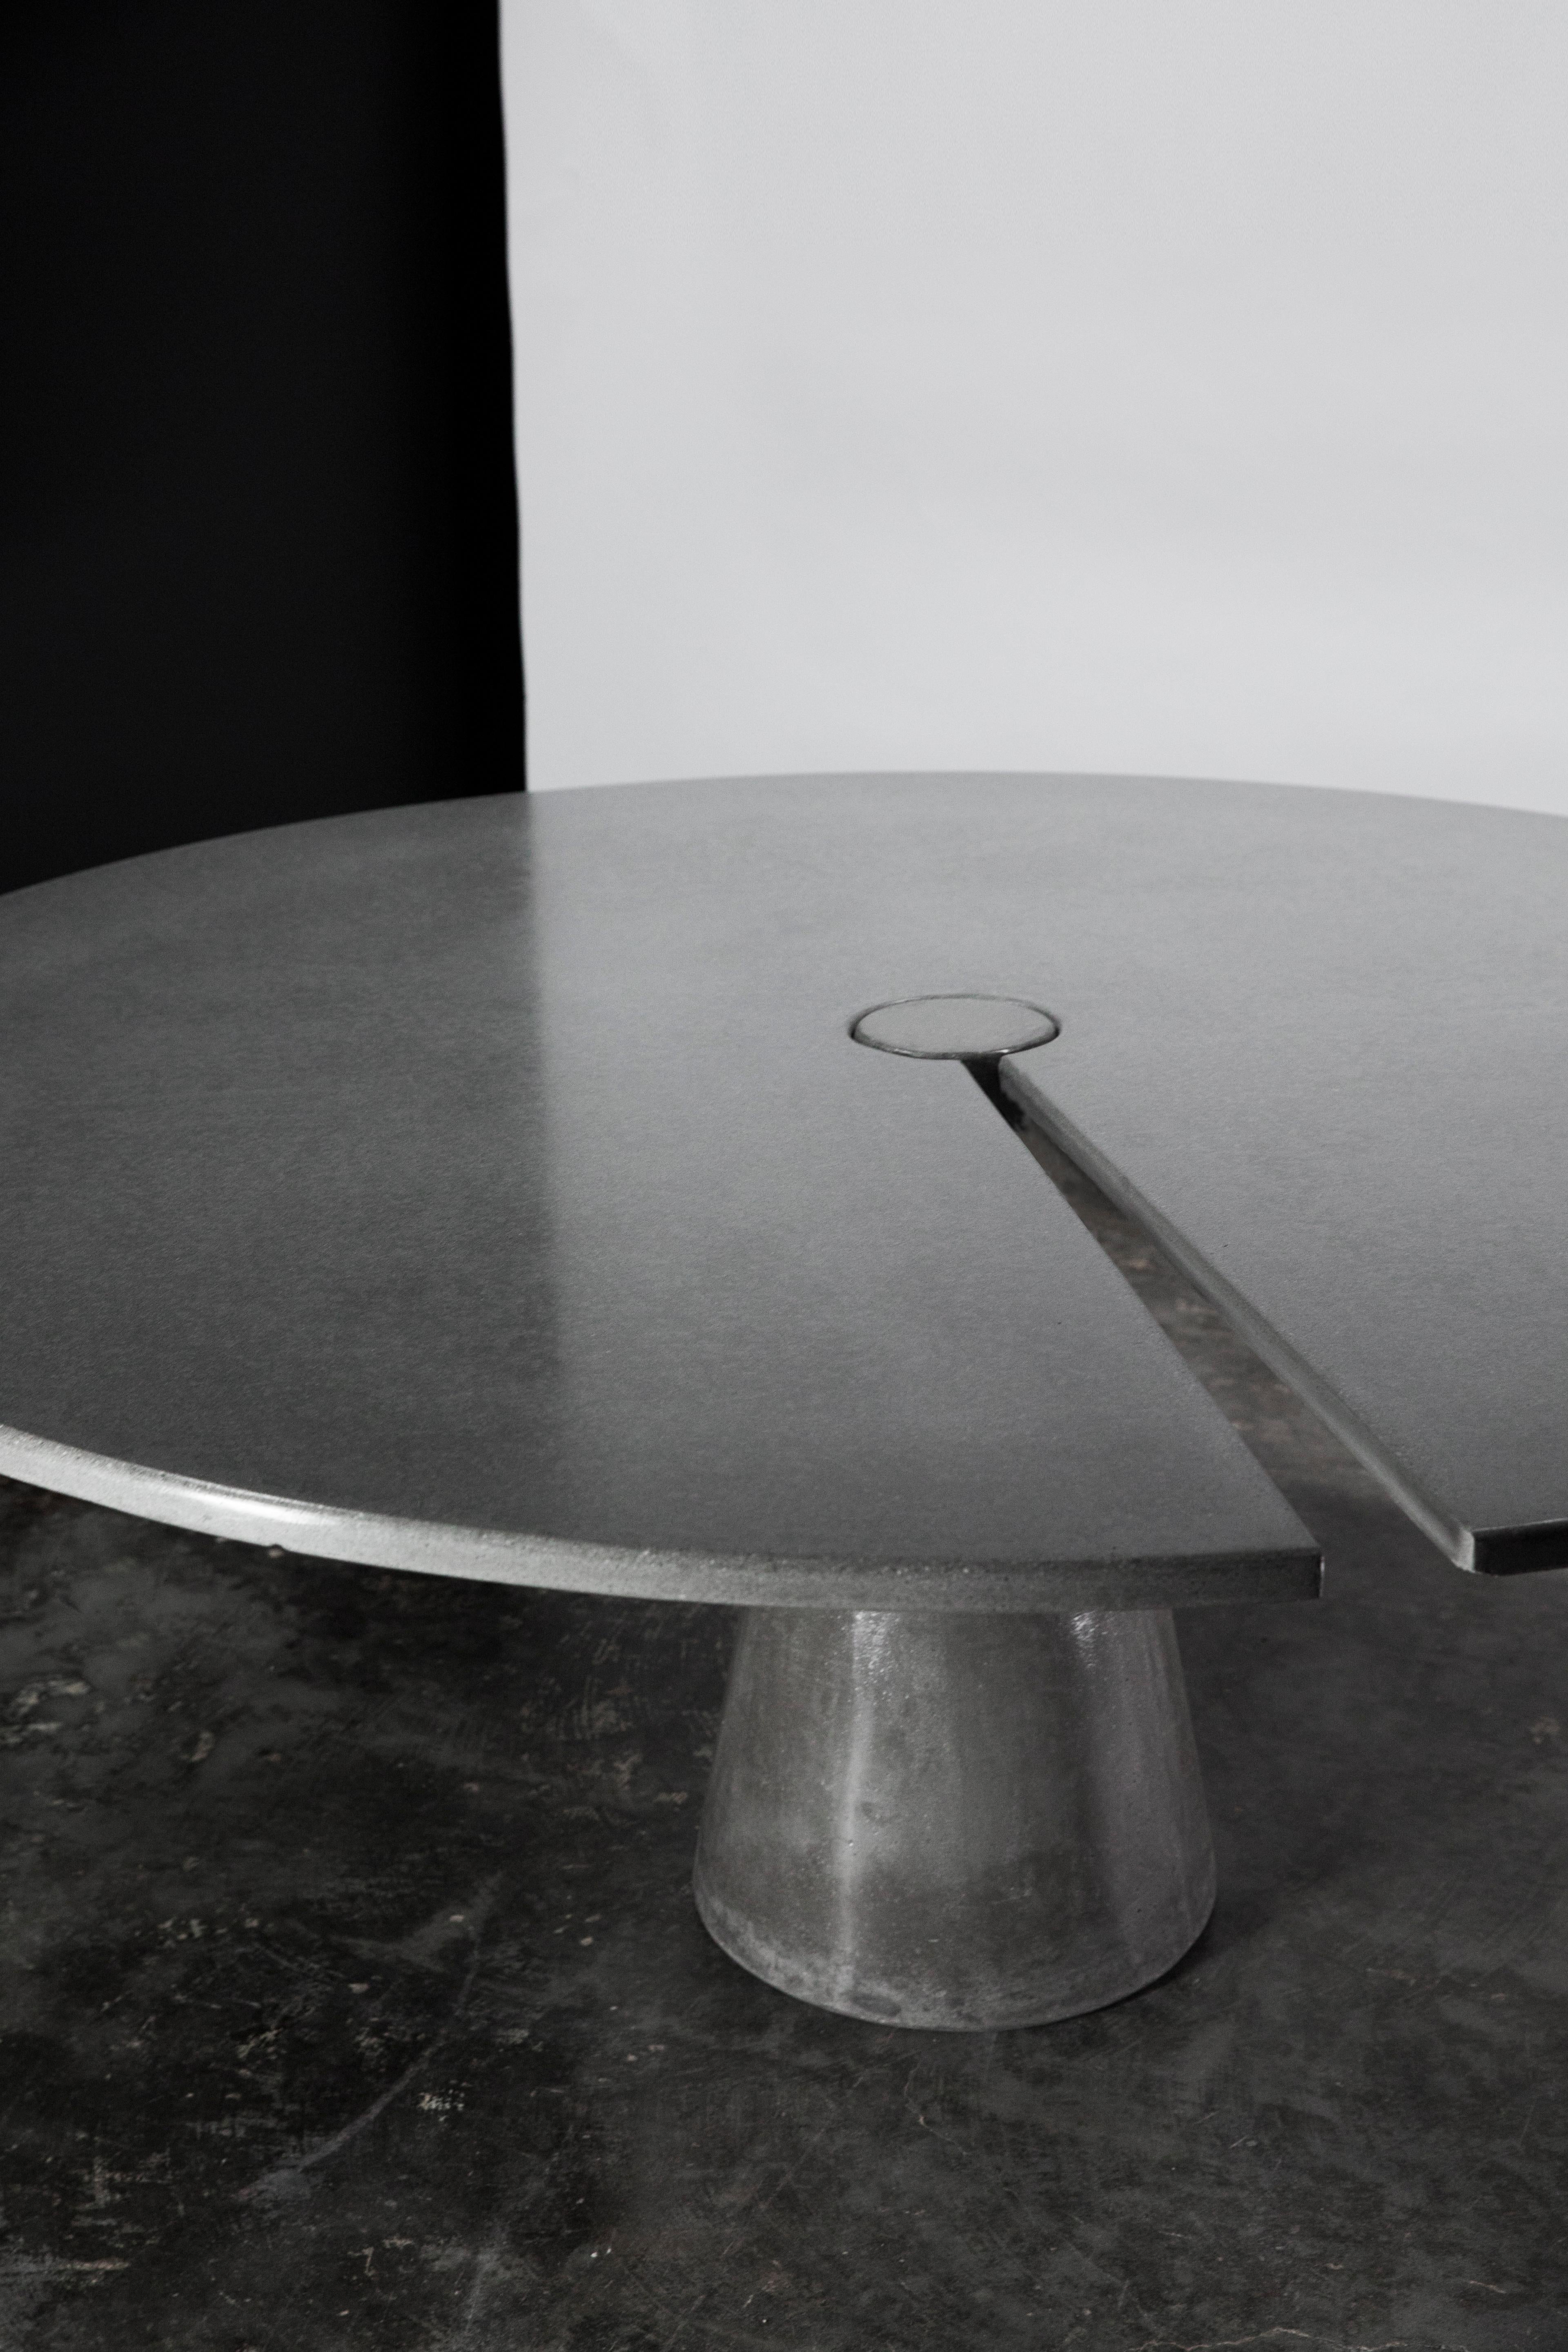 The James de Wulf classic Split Locking Dining Table features a split radius in the tabletop. The table consists of two pieces: table top and base, which are locked together by gravity alone. Equal in art and utility, as a collector's piece and as a